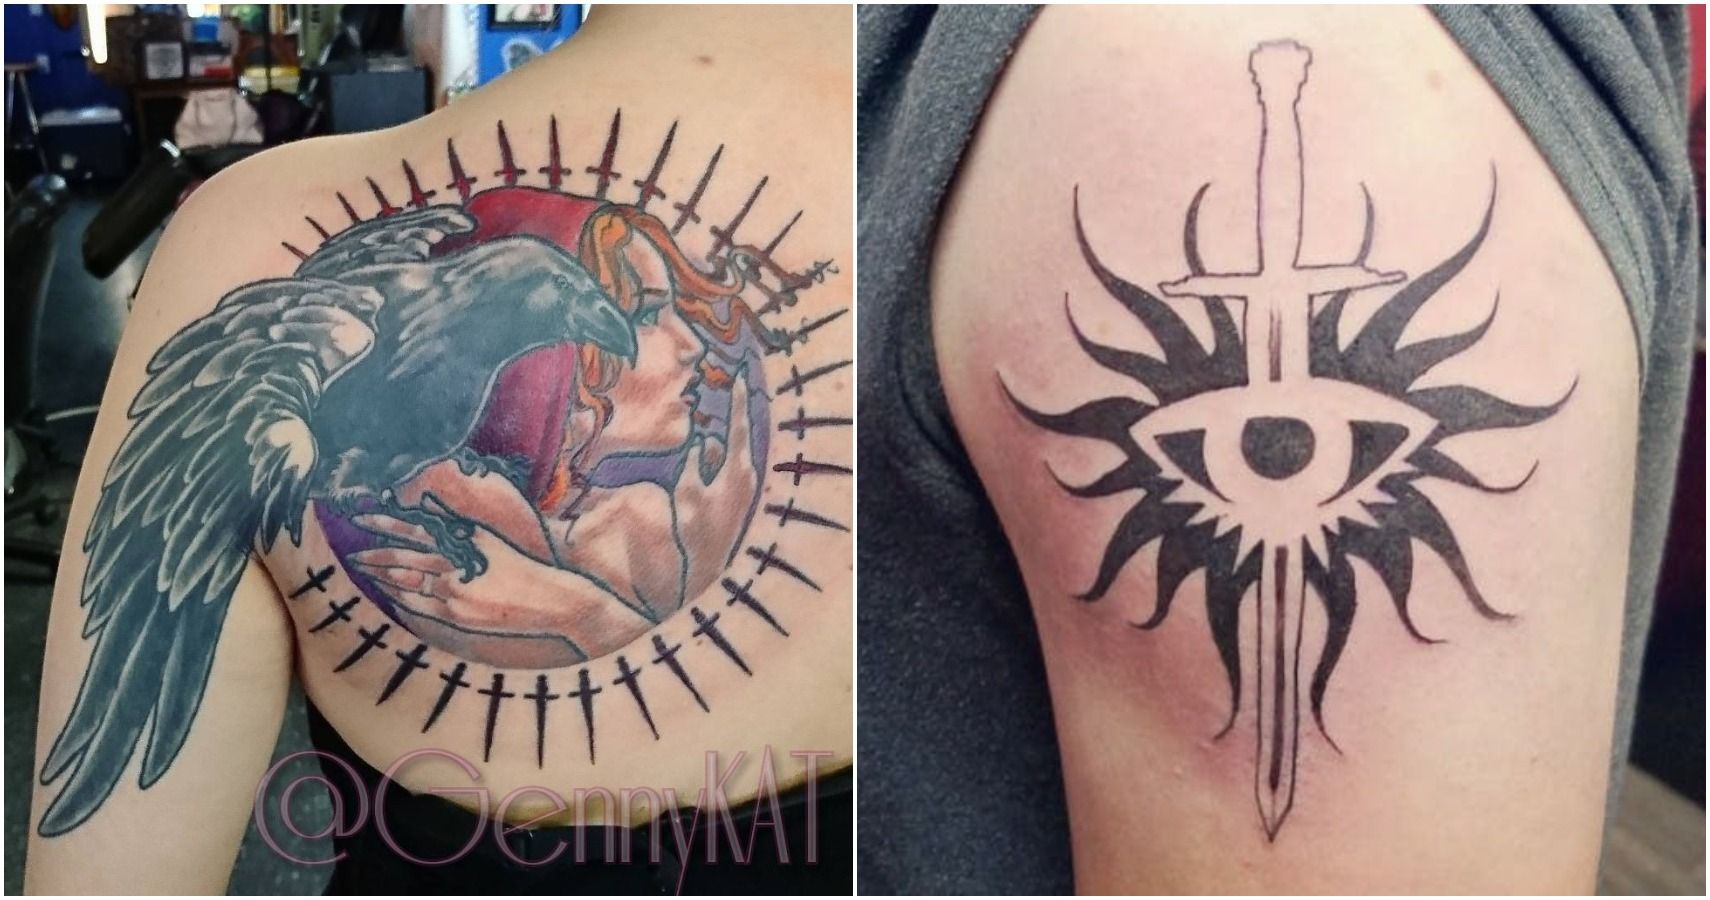 10 Dragon Age Tattoos The Biggest Fans Get.